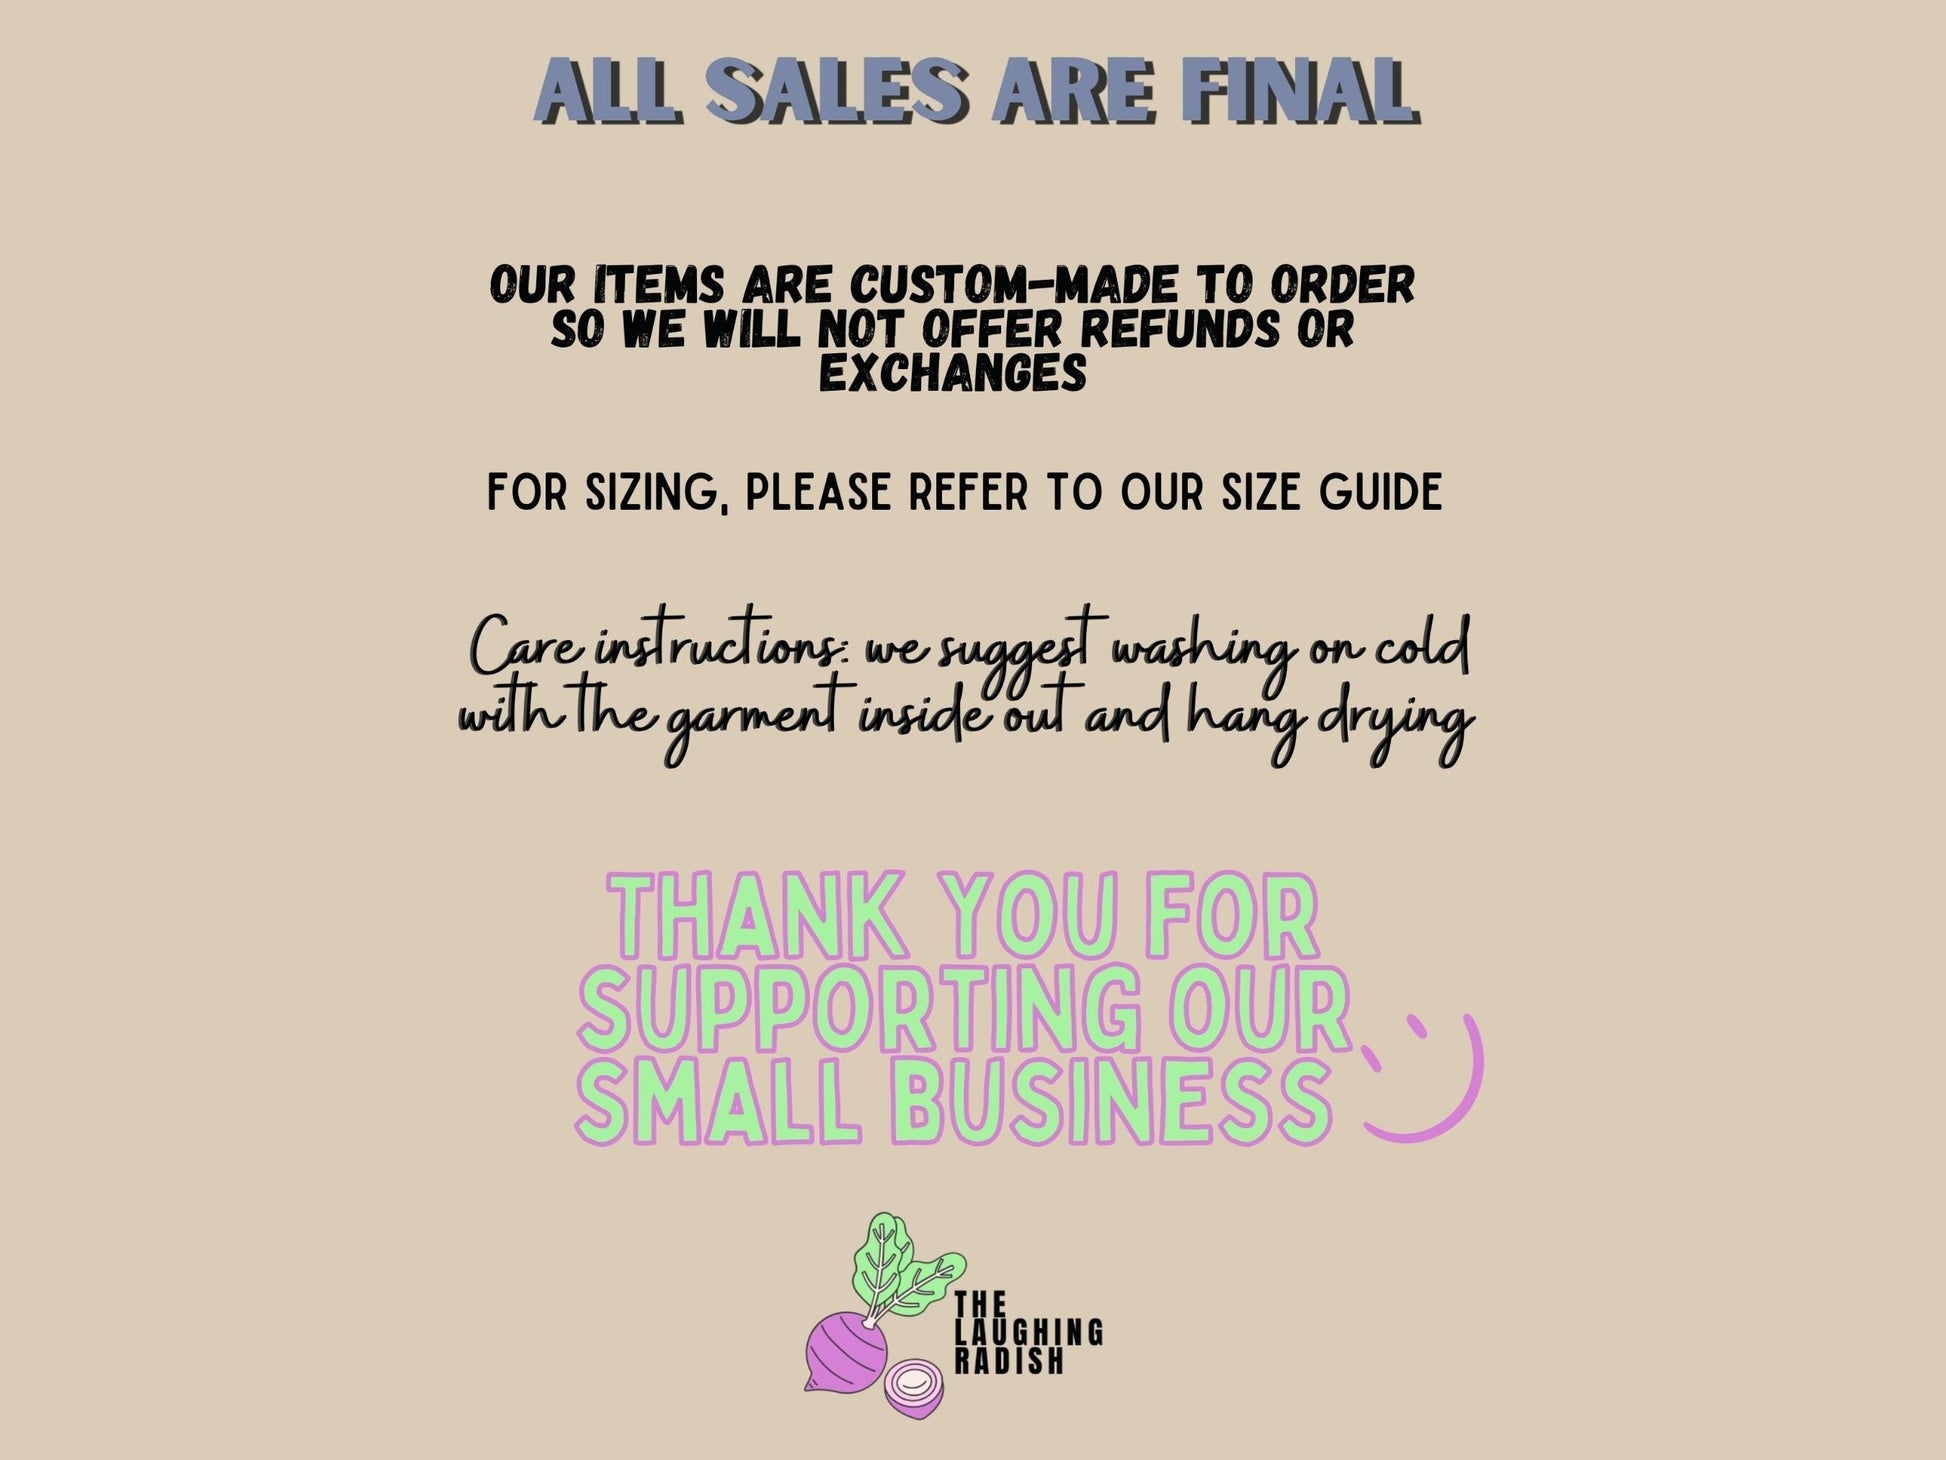 A section detailing how all sales are final. Items are custom-made to order so we will not offer refunds or exchanges. For sizing, please refer to our size guide. Care instructions: suggest washing on cold with the garment inside out and hang drying.